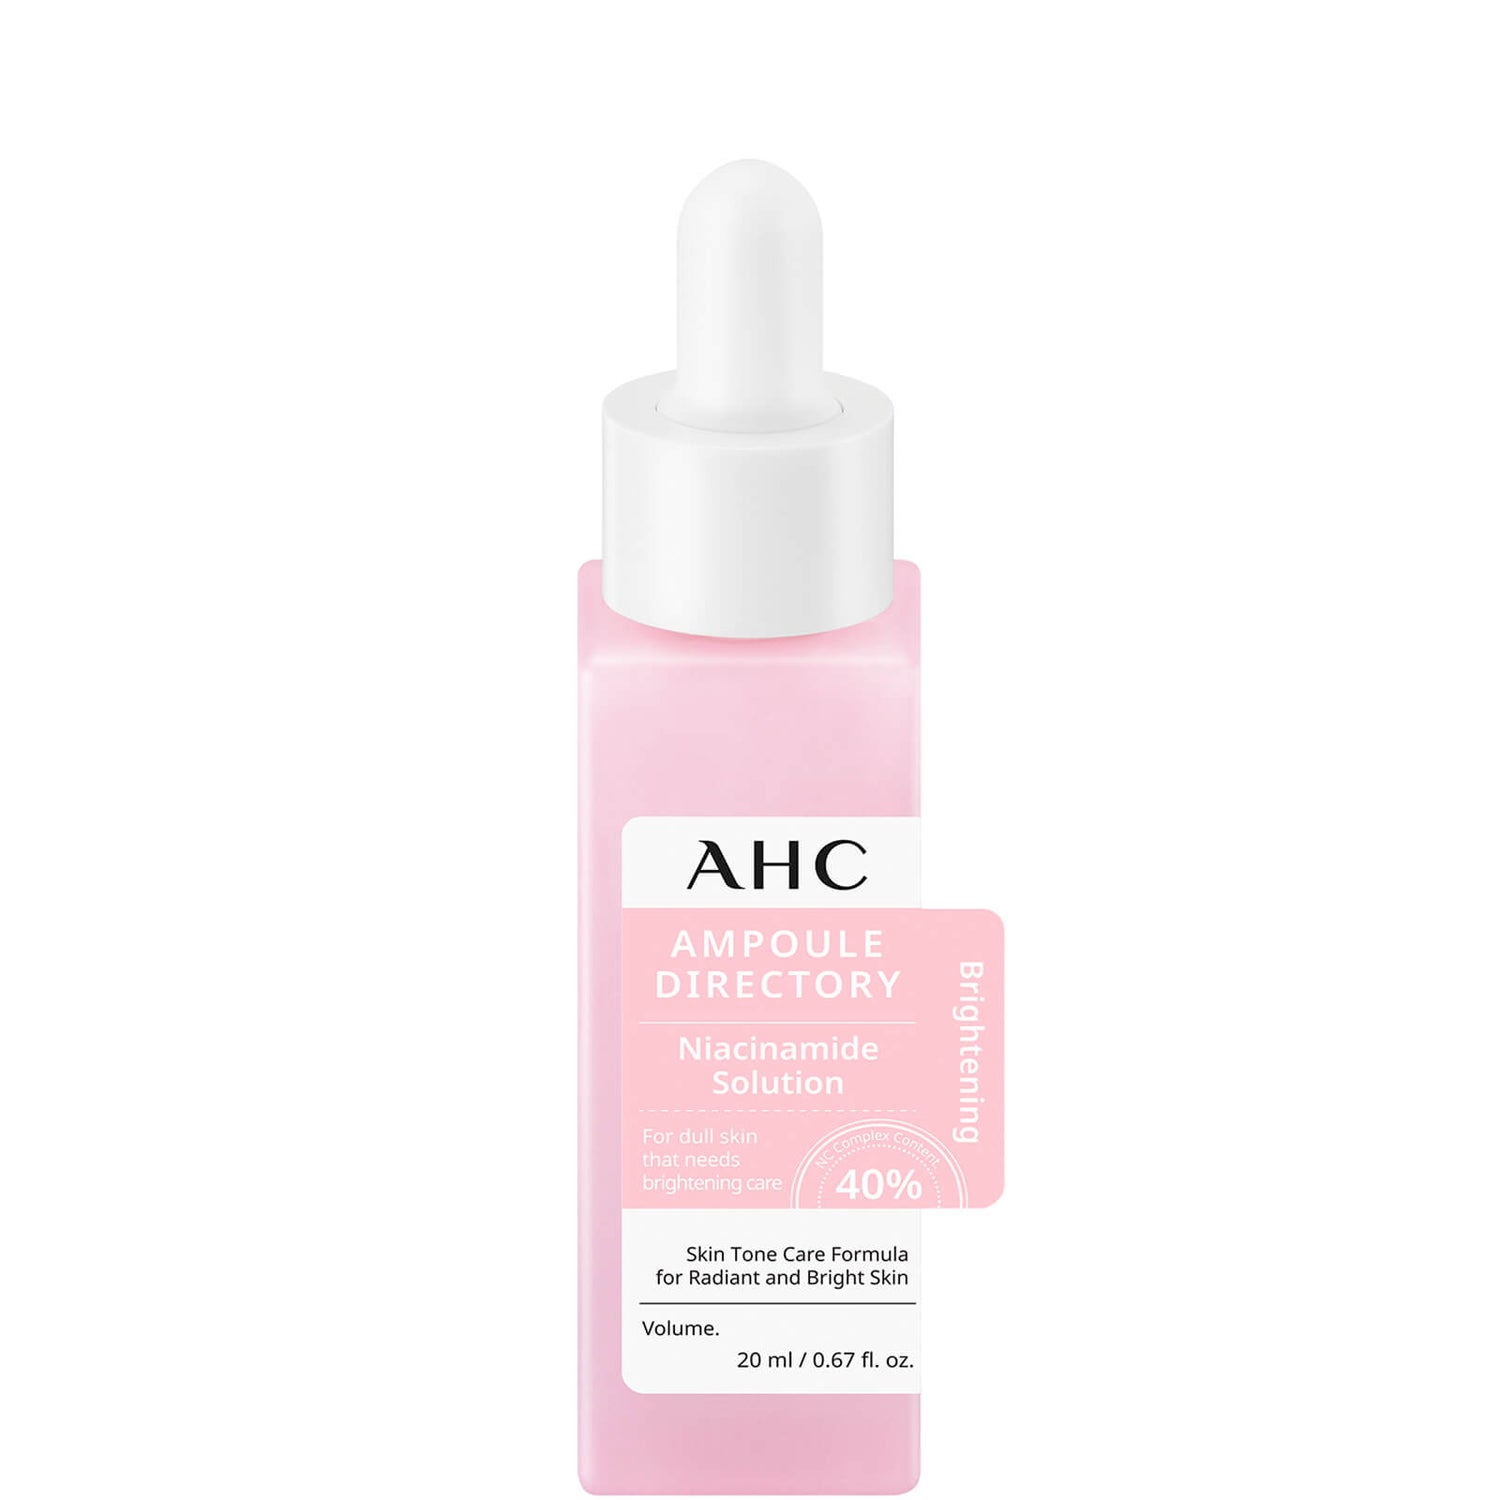 AHC Ampoule Directory Niacinamide Whitening Solution 20ml